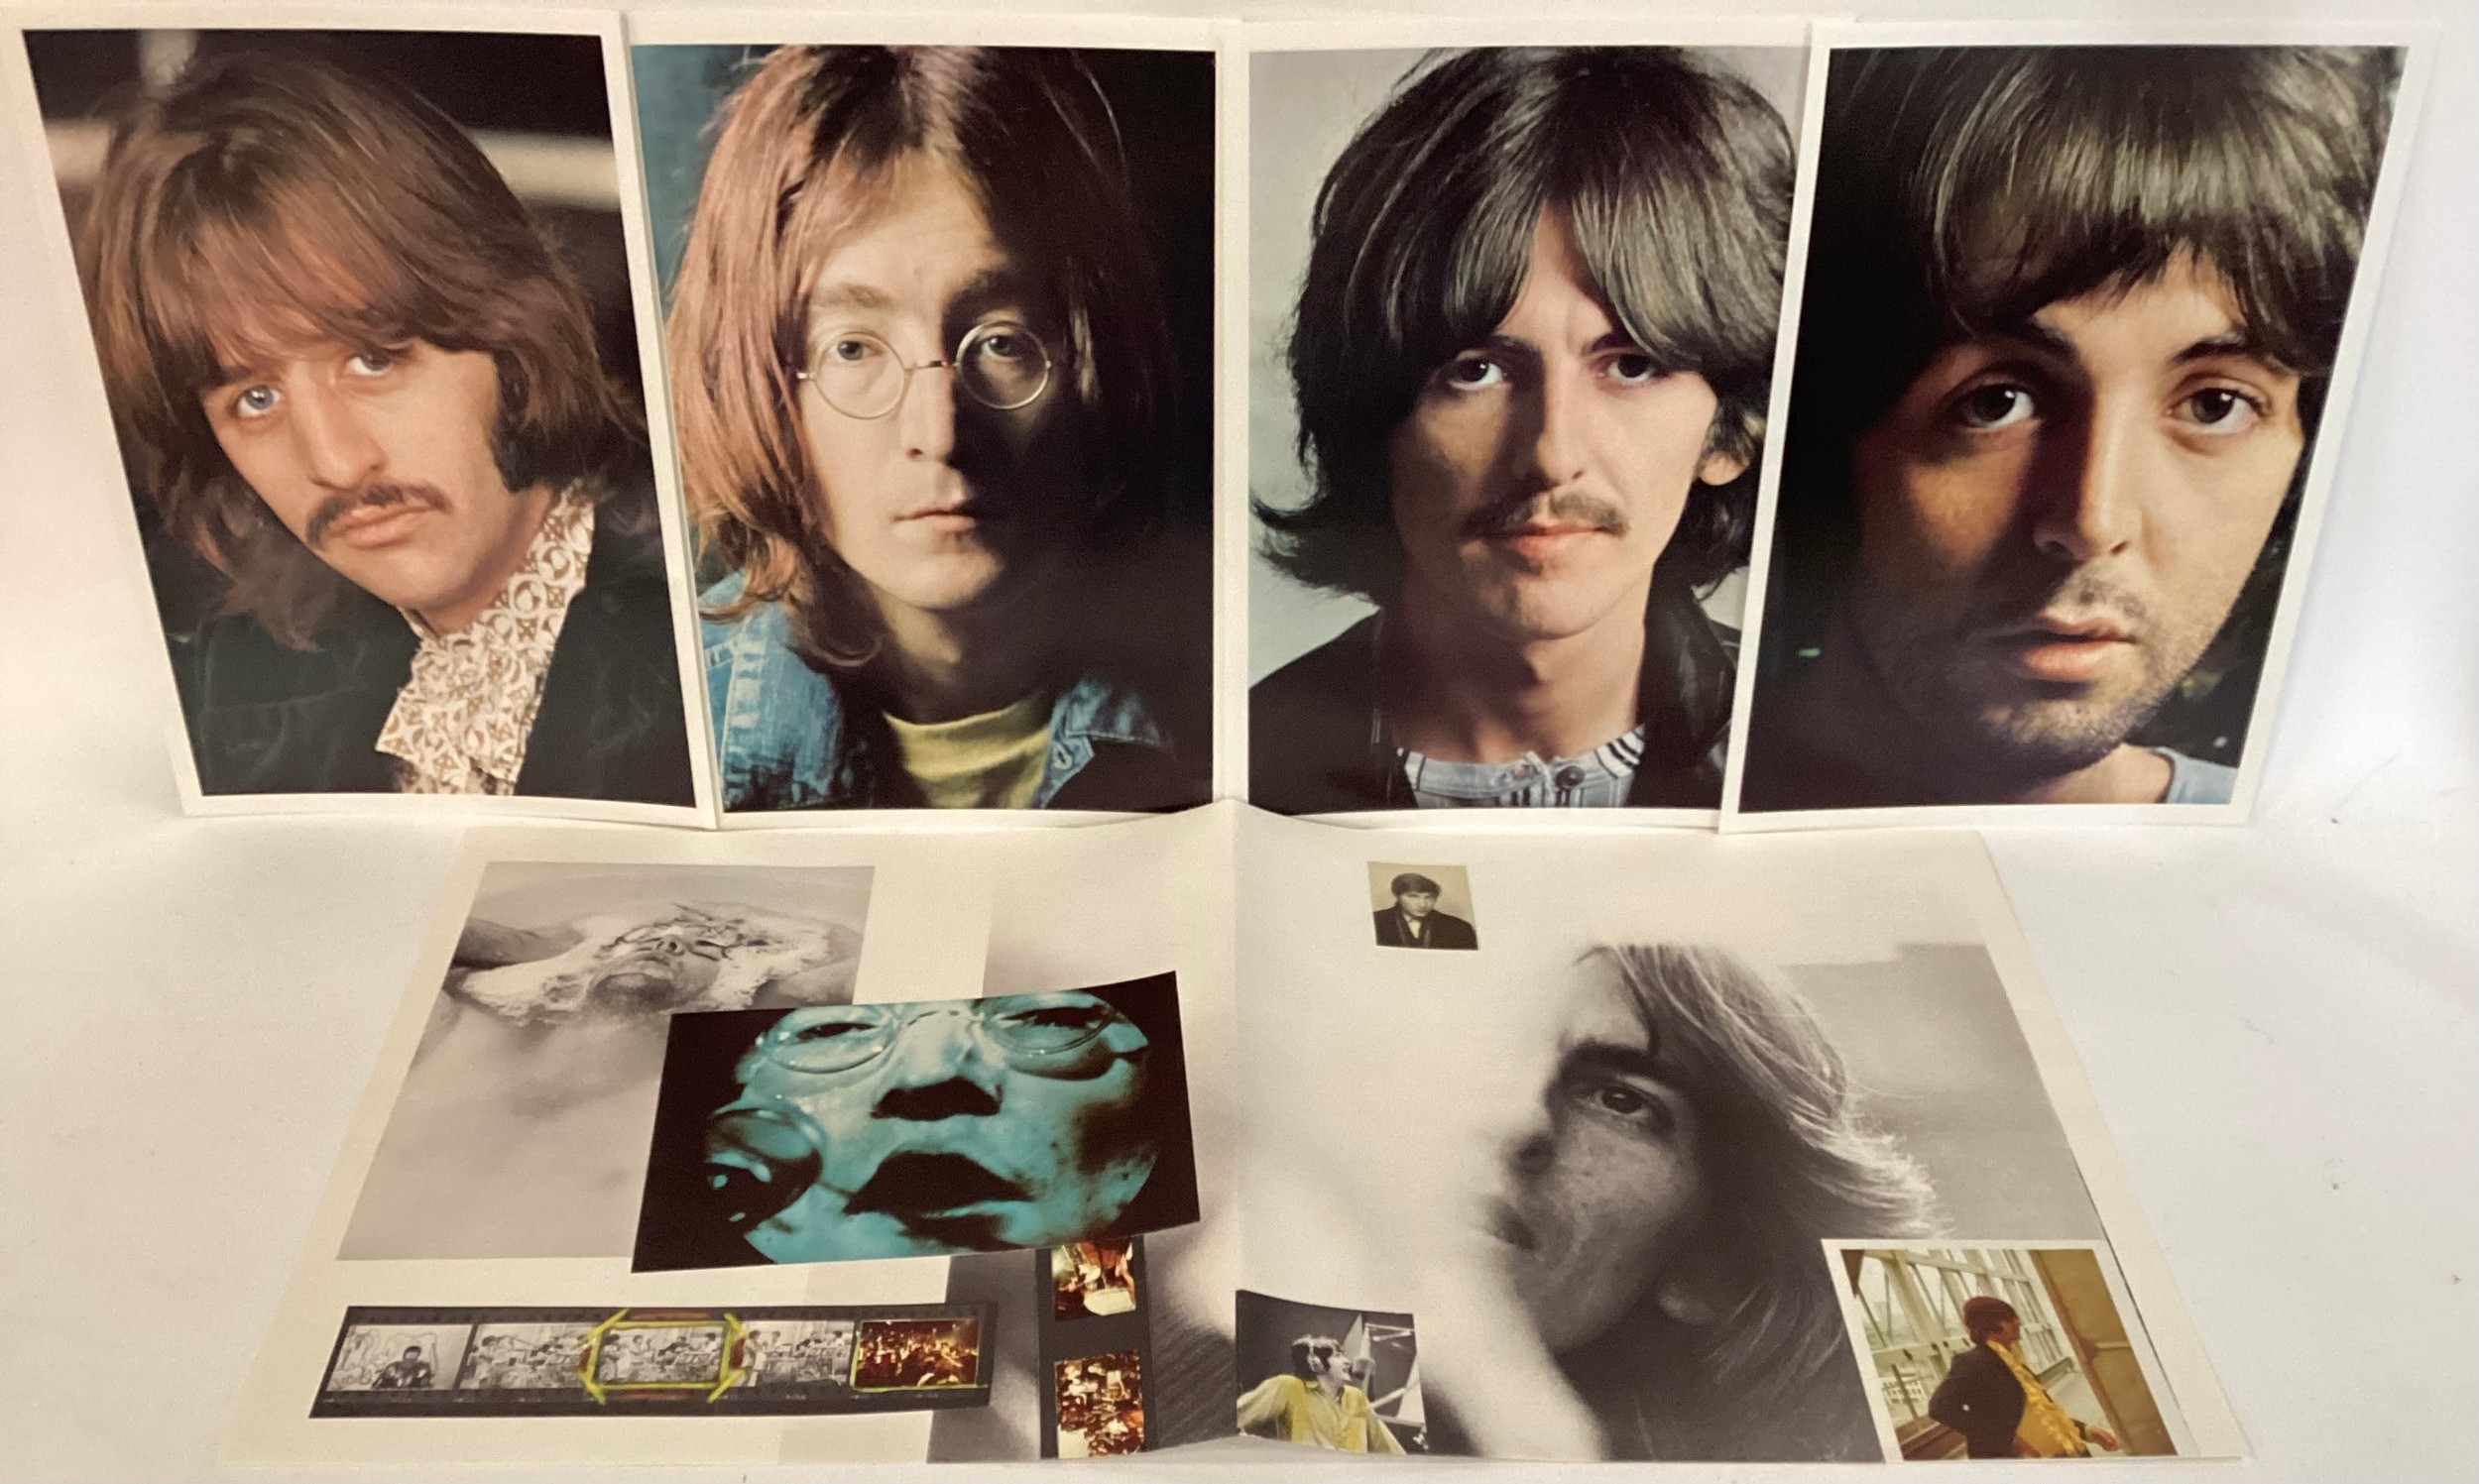 BEATLES UN-NUMBERED WHITE ALBUM. Released originally in 1968 and found here in Ex condition on Apple - Image 6 of 6